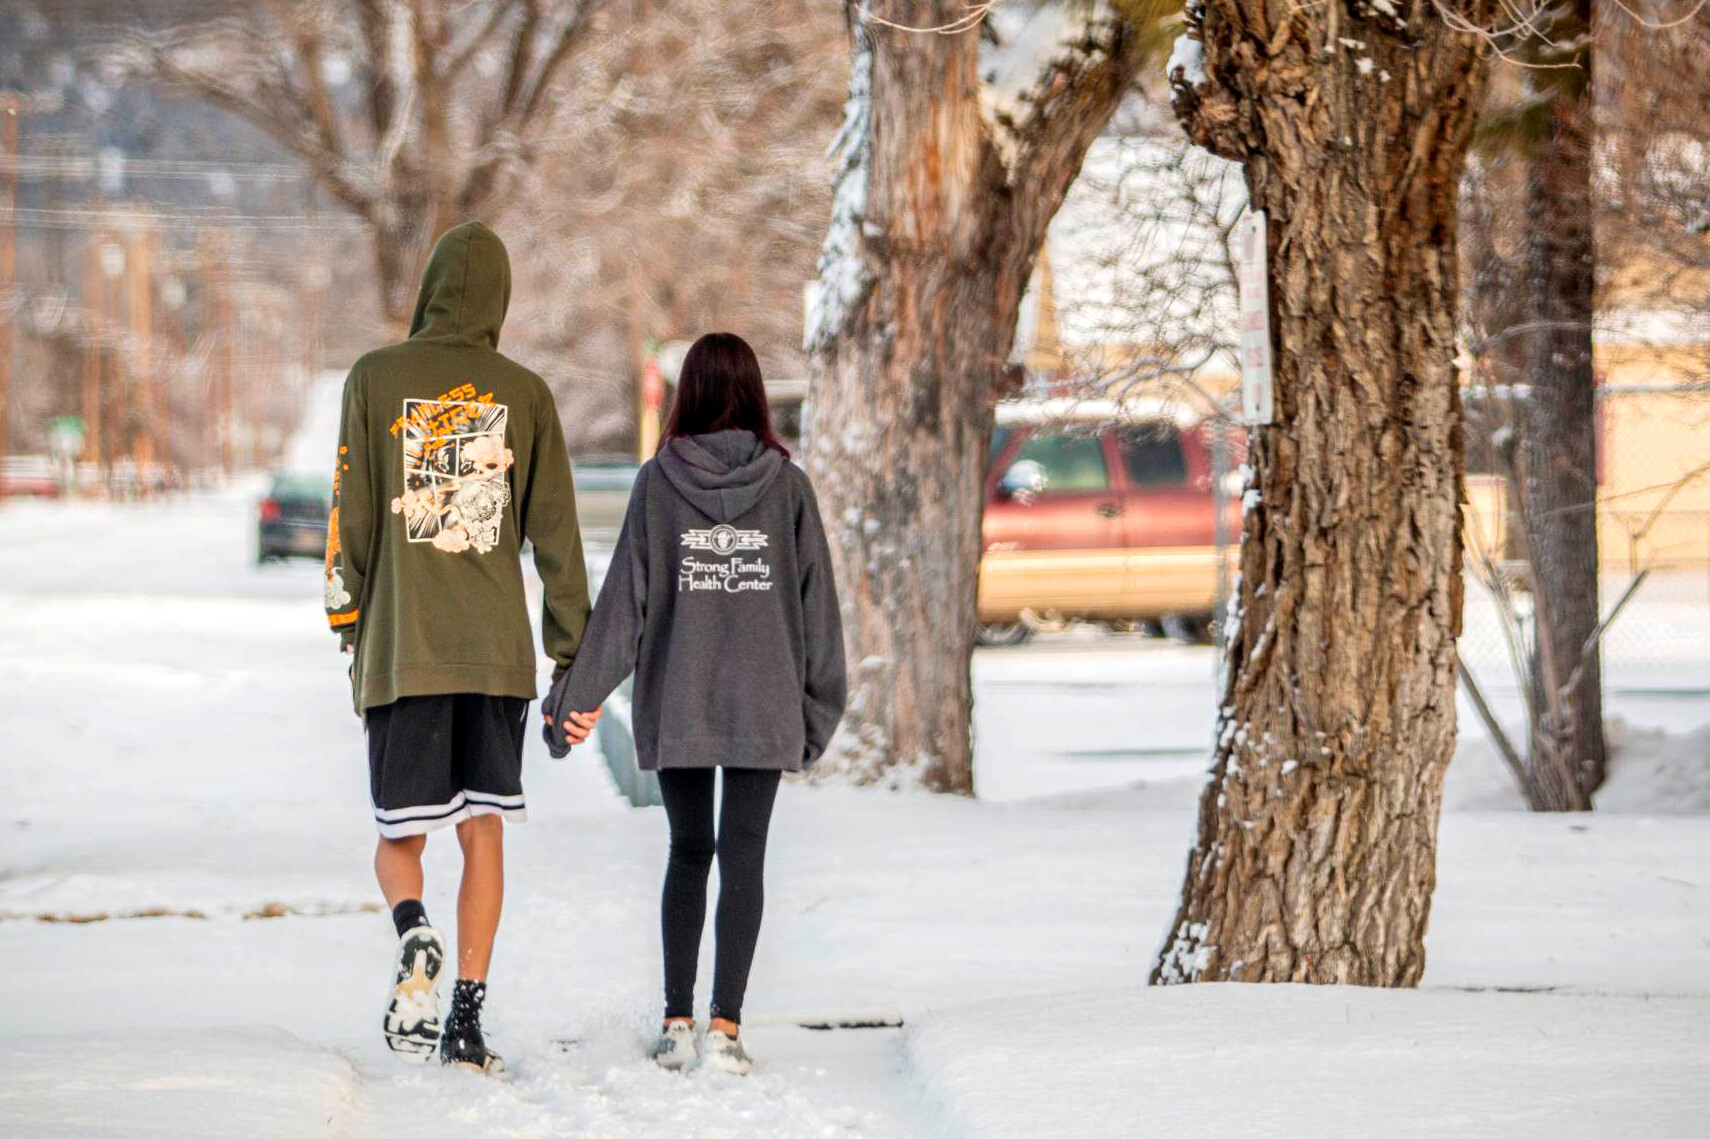 A young couple walks in the snow holding hands with their backs toward the camera.